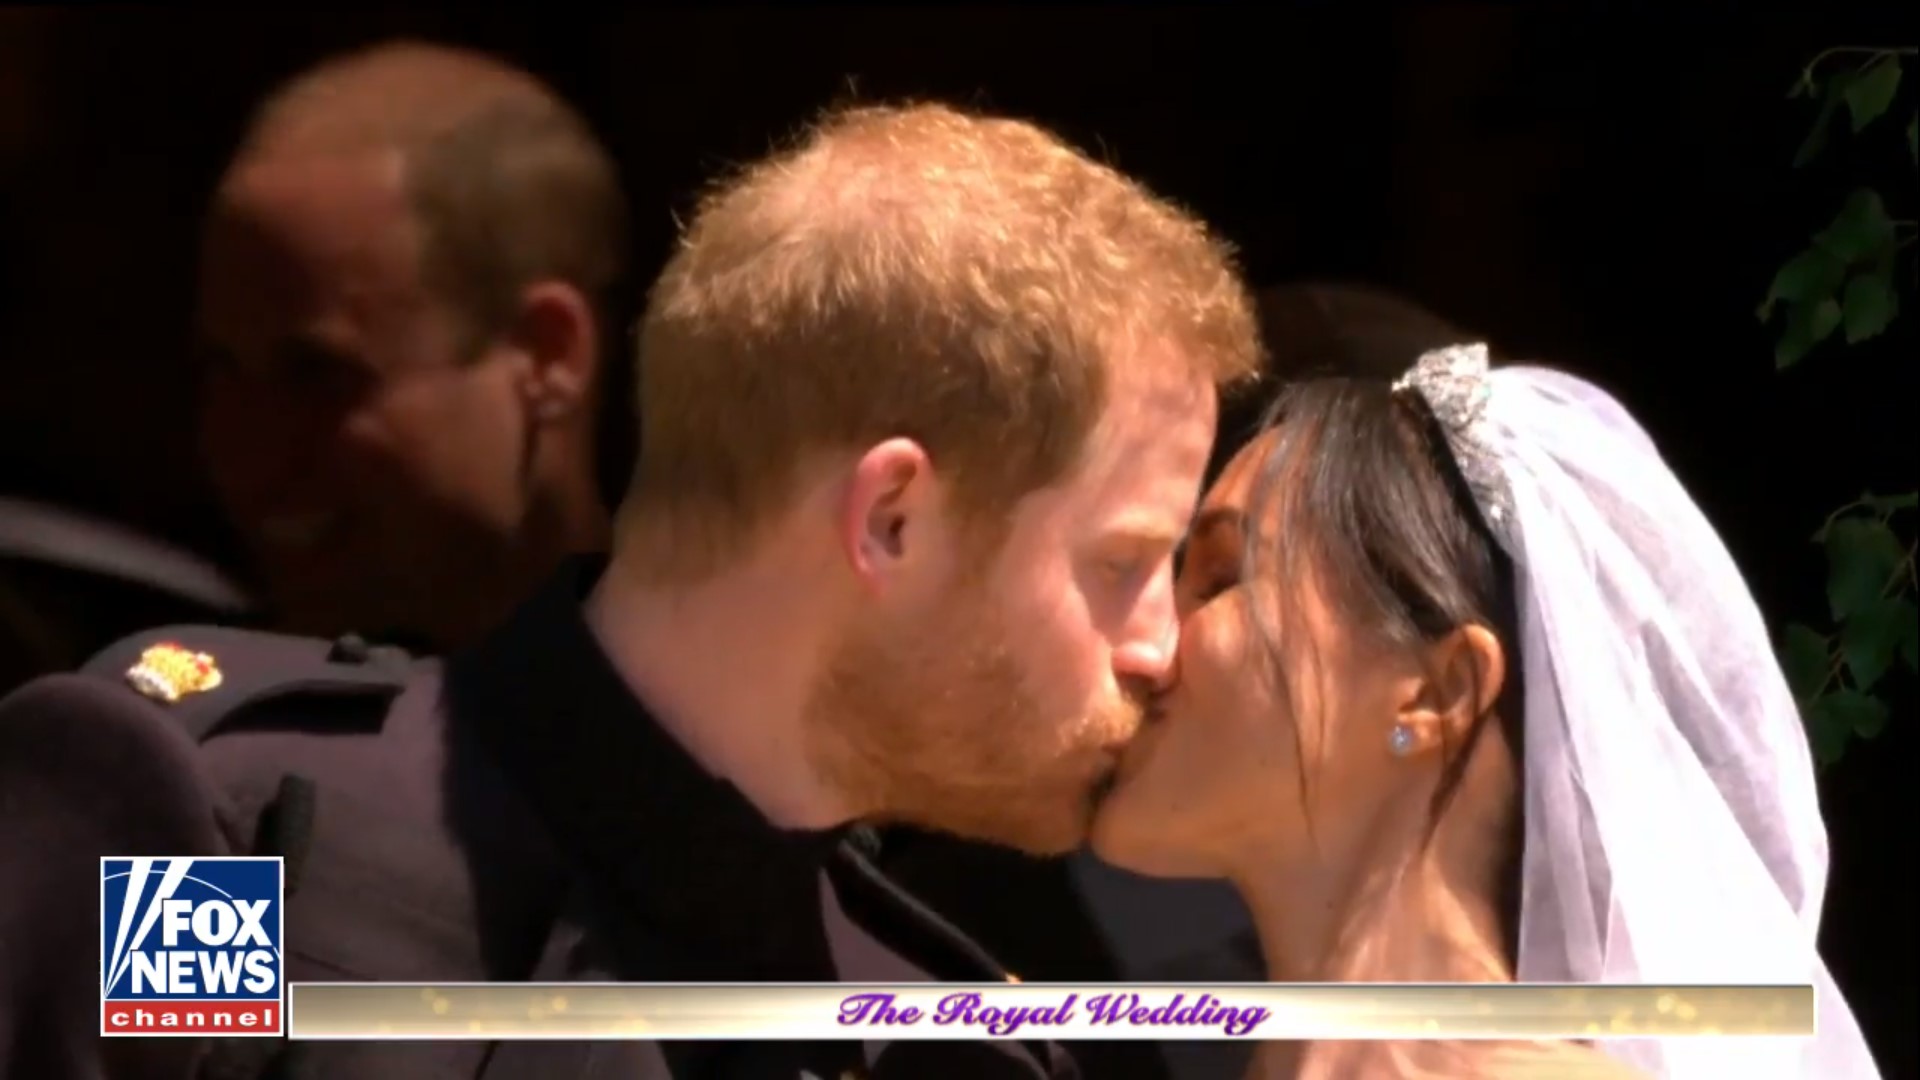 Fox News’ Royal Wedding Coverage Most-Watched In Cable News, CNN Tops Demo